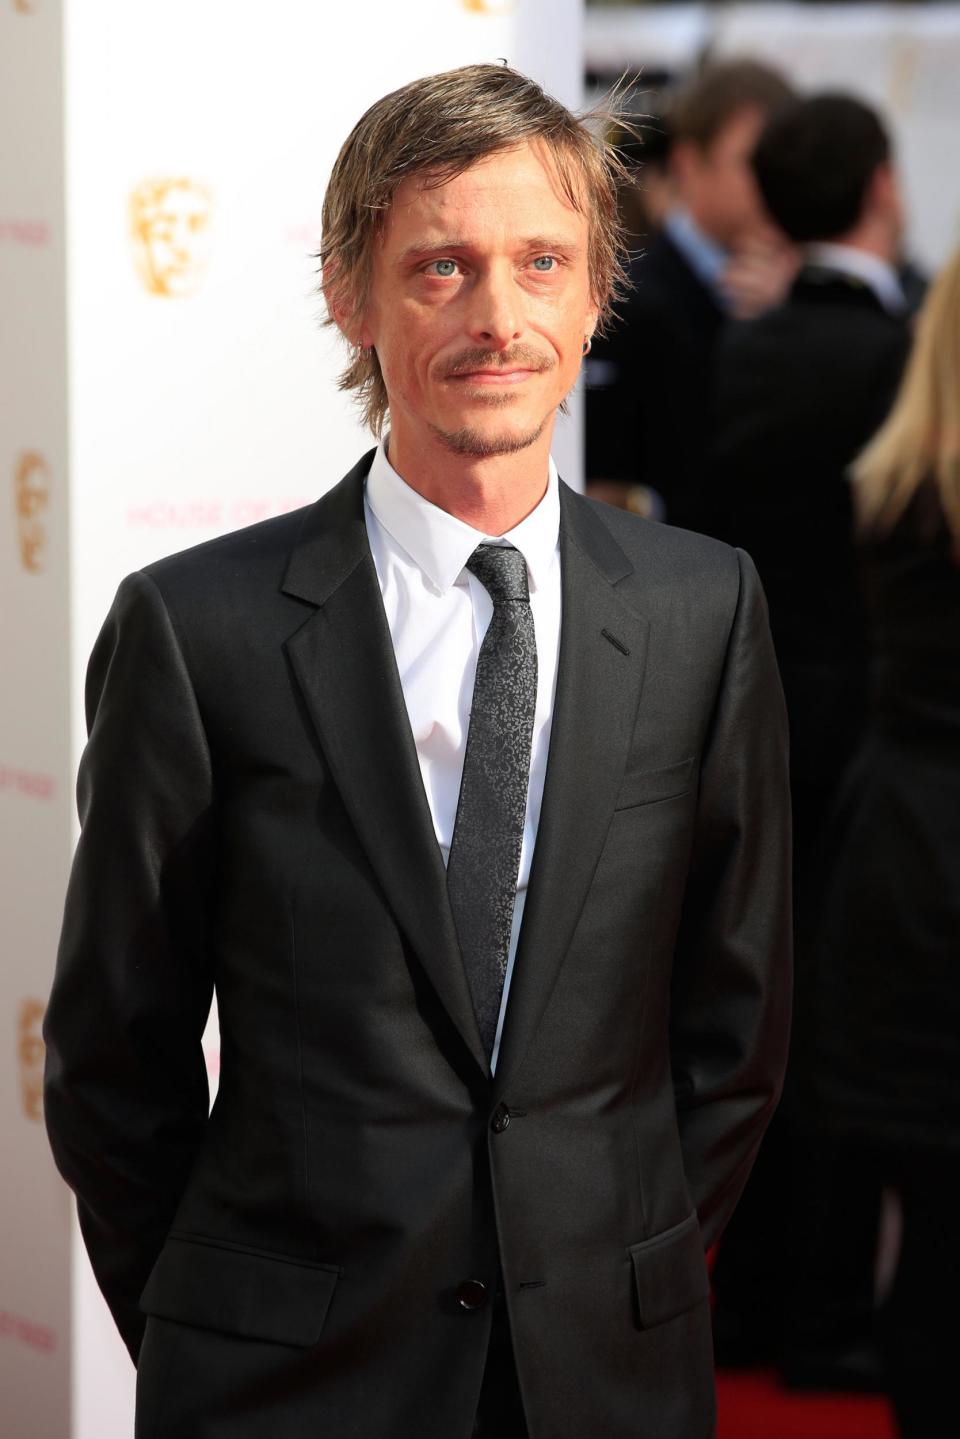 Mackenzie Crook has described the process of donning prosthetics for his role as Worzel Gummidge as